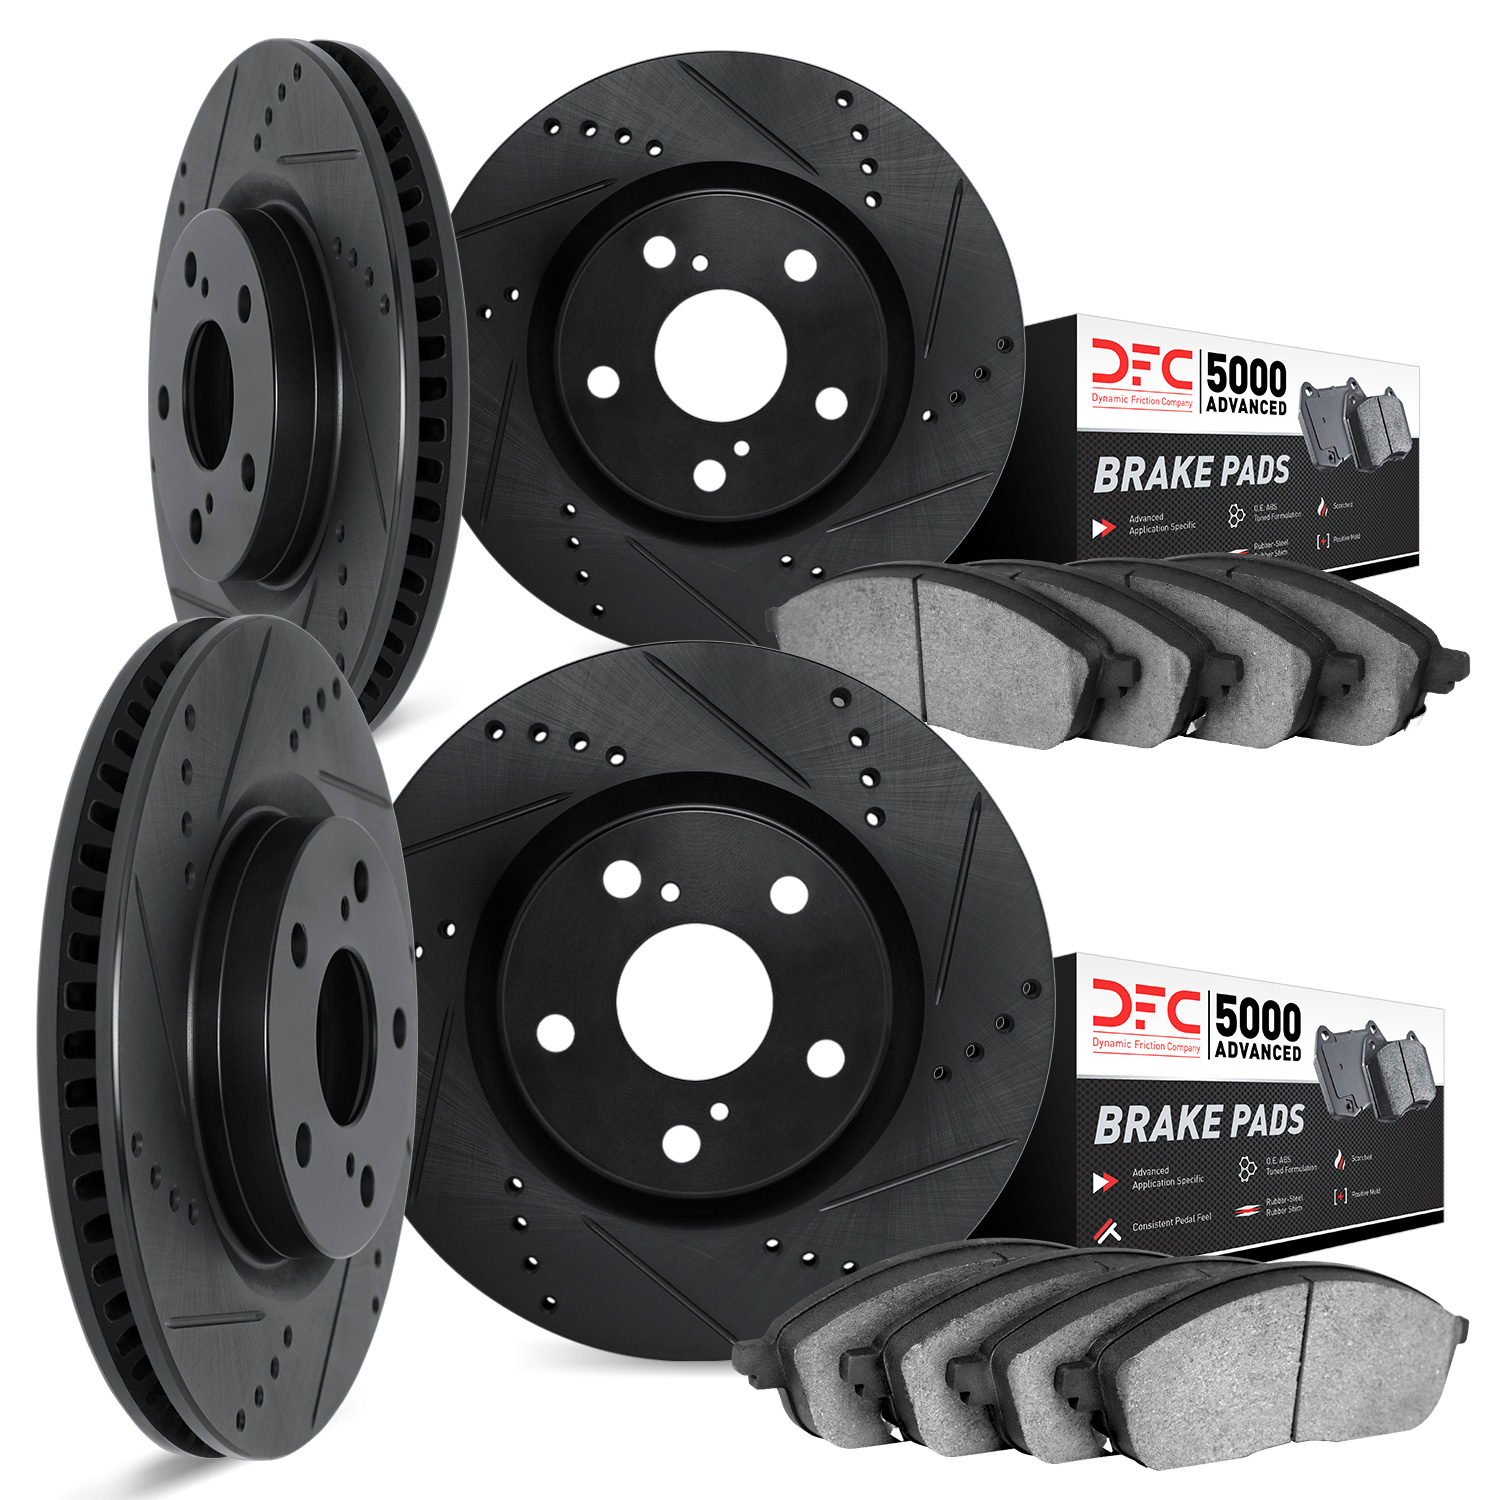 8504-31063 Drilled/Slotted Brake Rotors w/5000 Advanced Brake Pads Kit [Black], 2004-2006 BMW, Position: Front and Rear